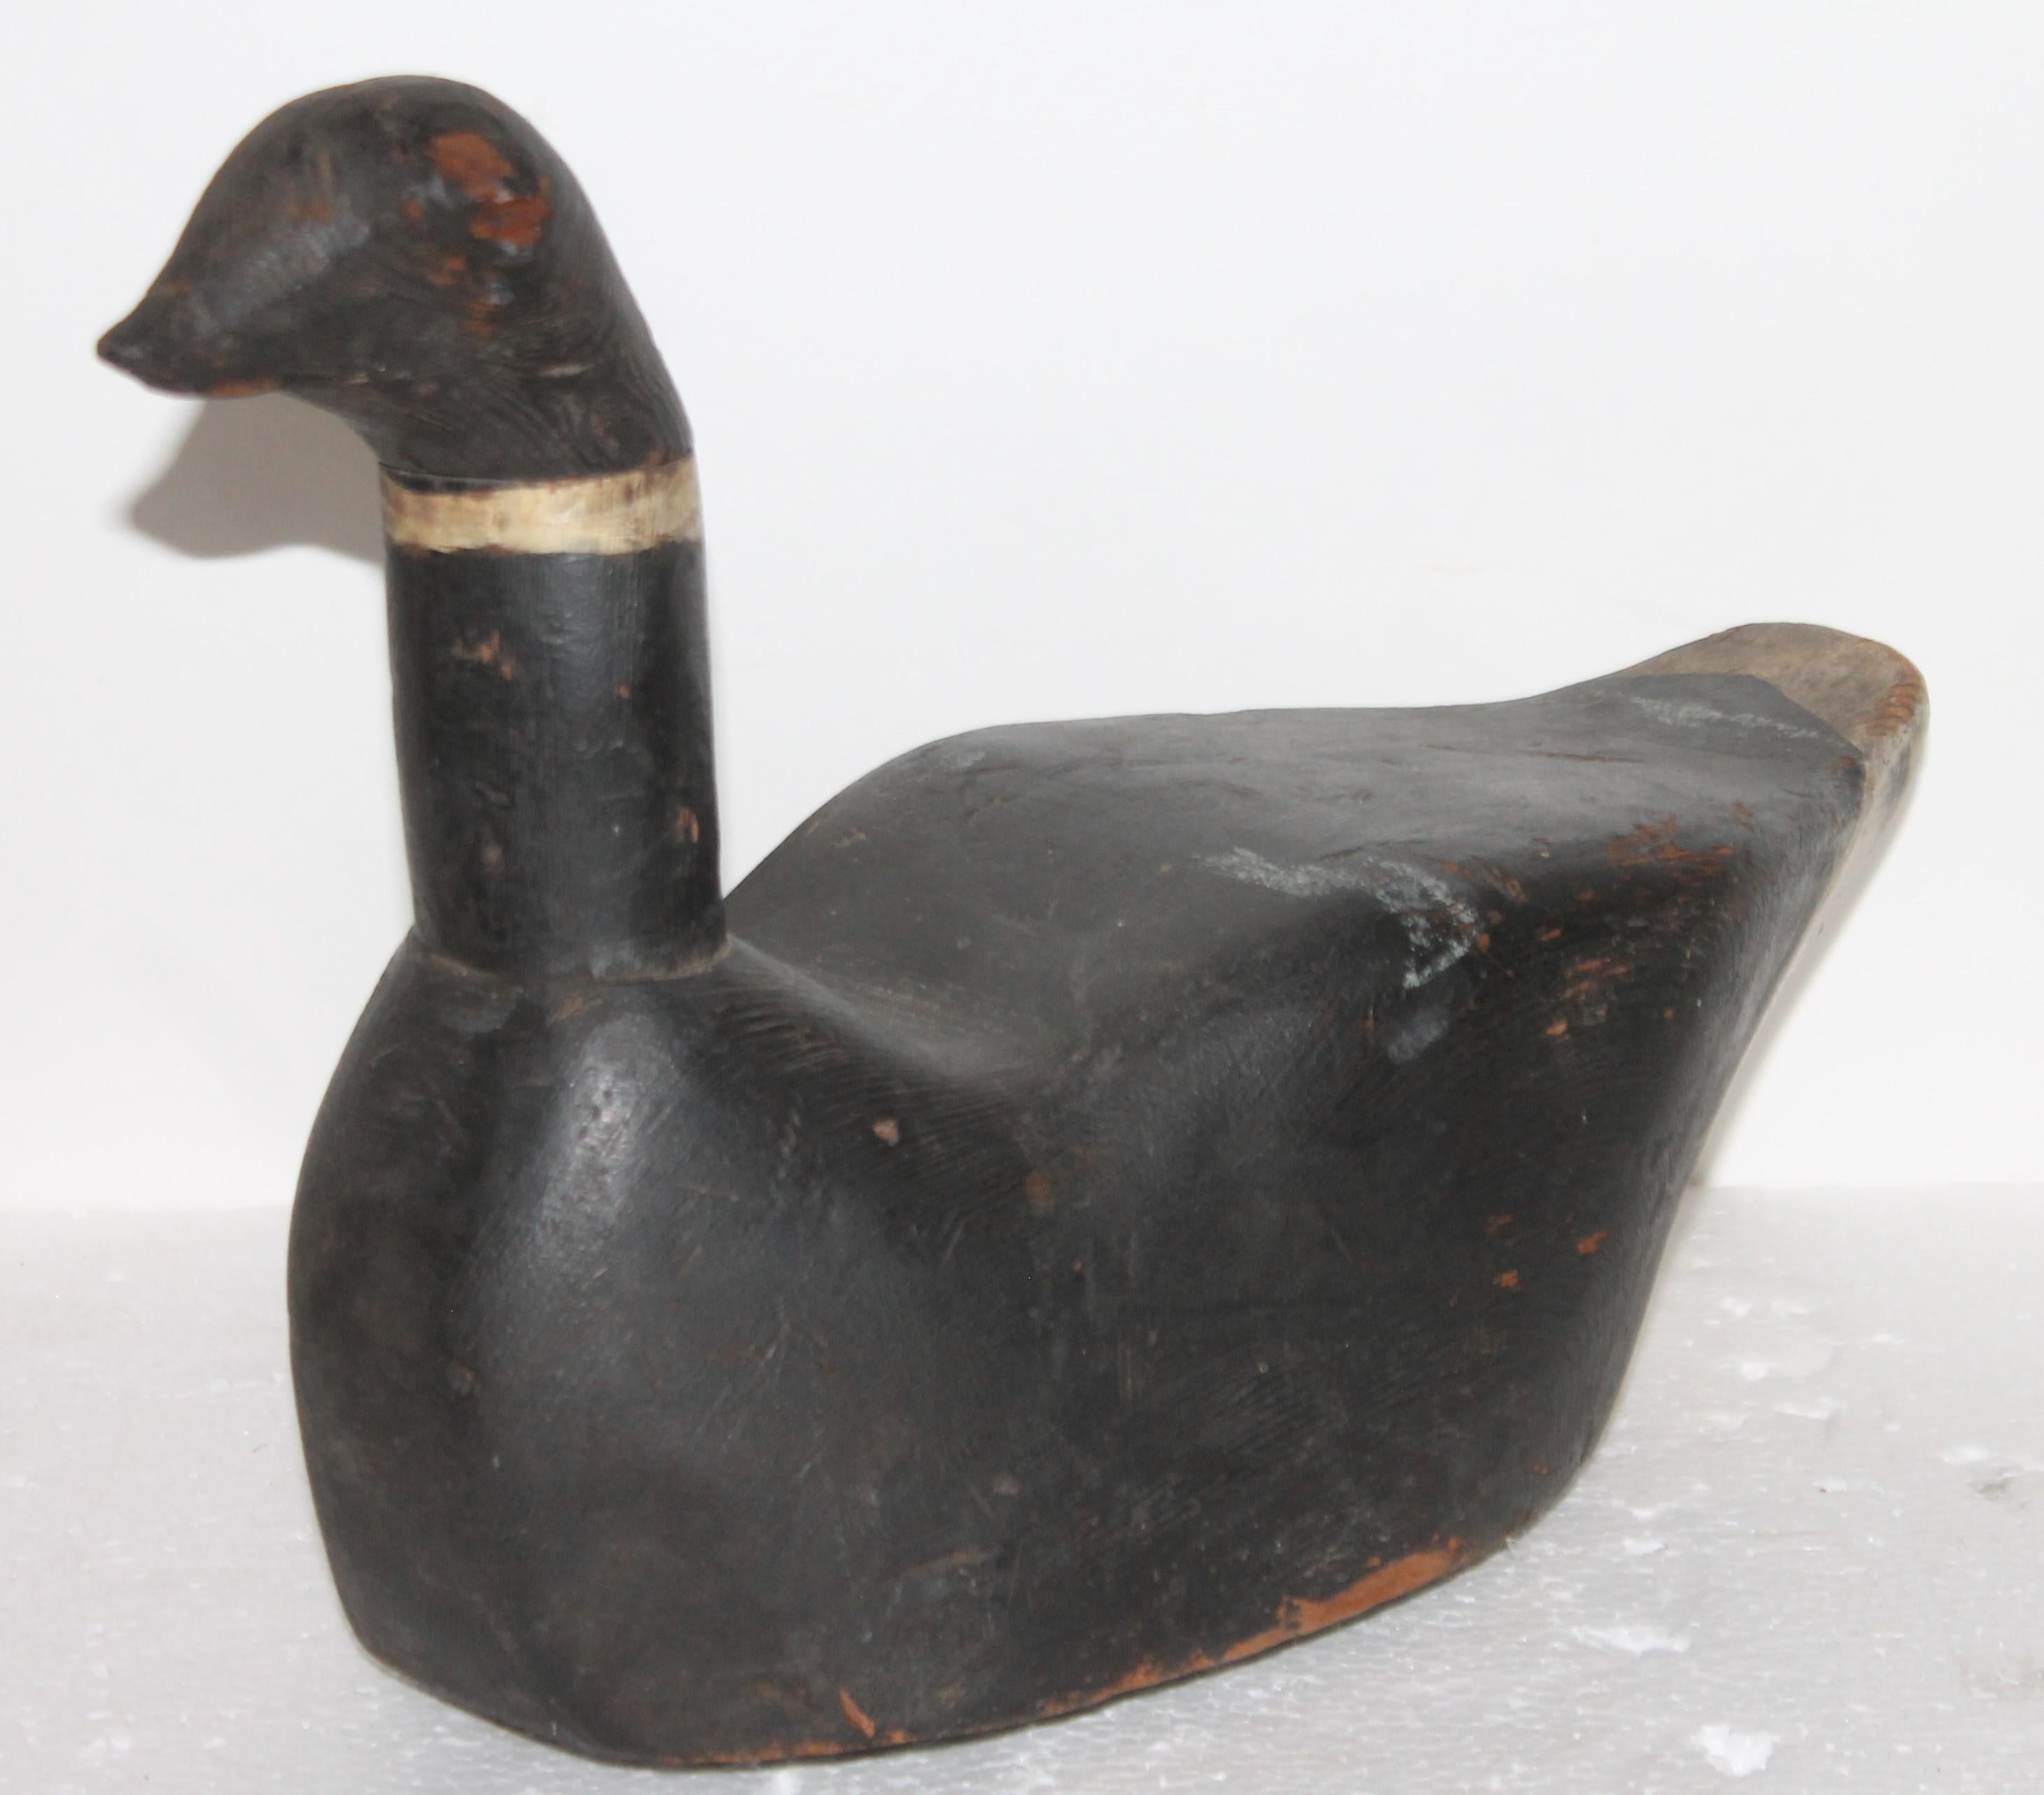 This all original black and white painted decoy is in fine condition. It is original painted surface. It was found in New England.